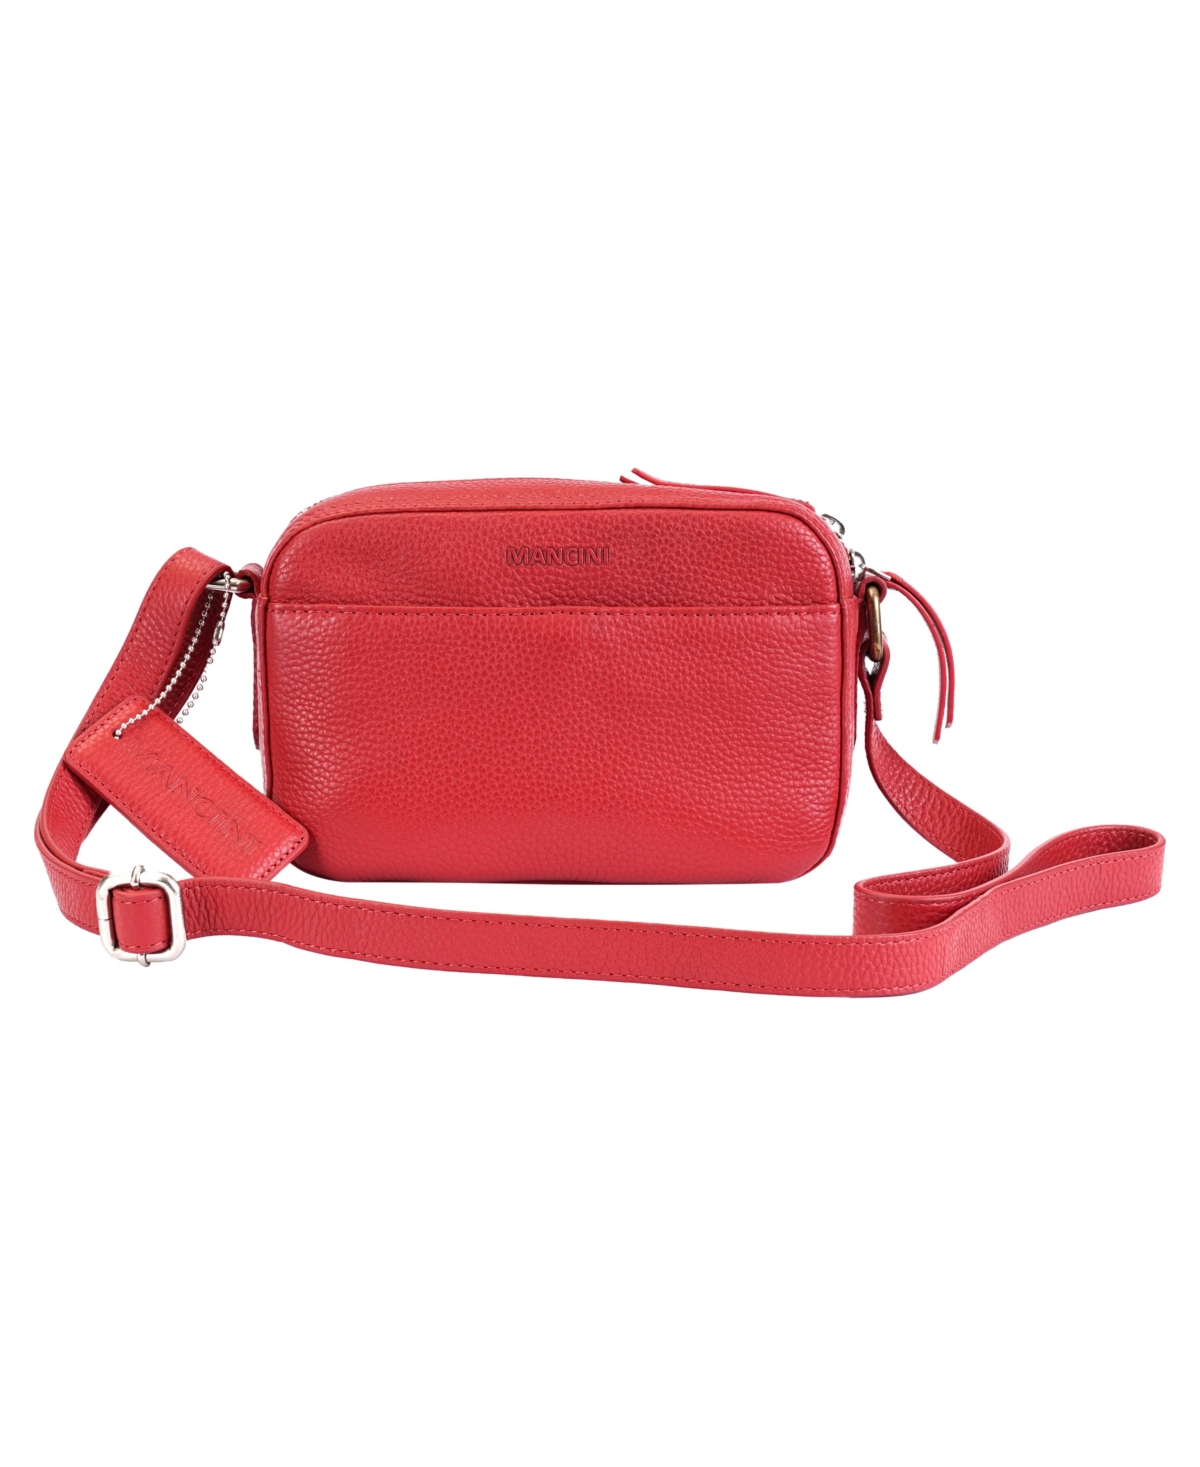 Mancini Pebbled Collection Clara Leather Small Crossbody Bag In Red